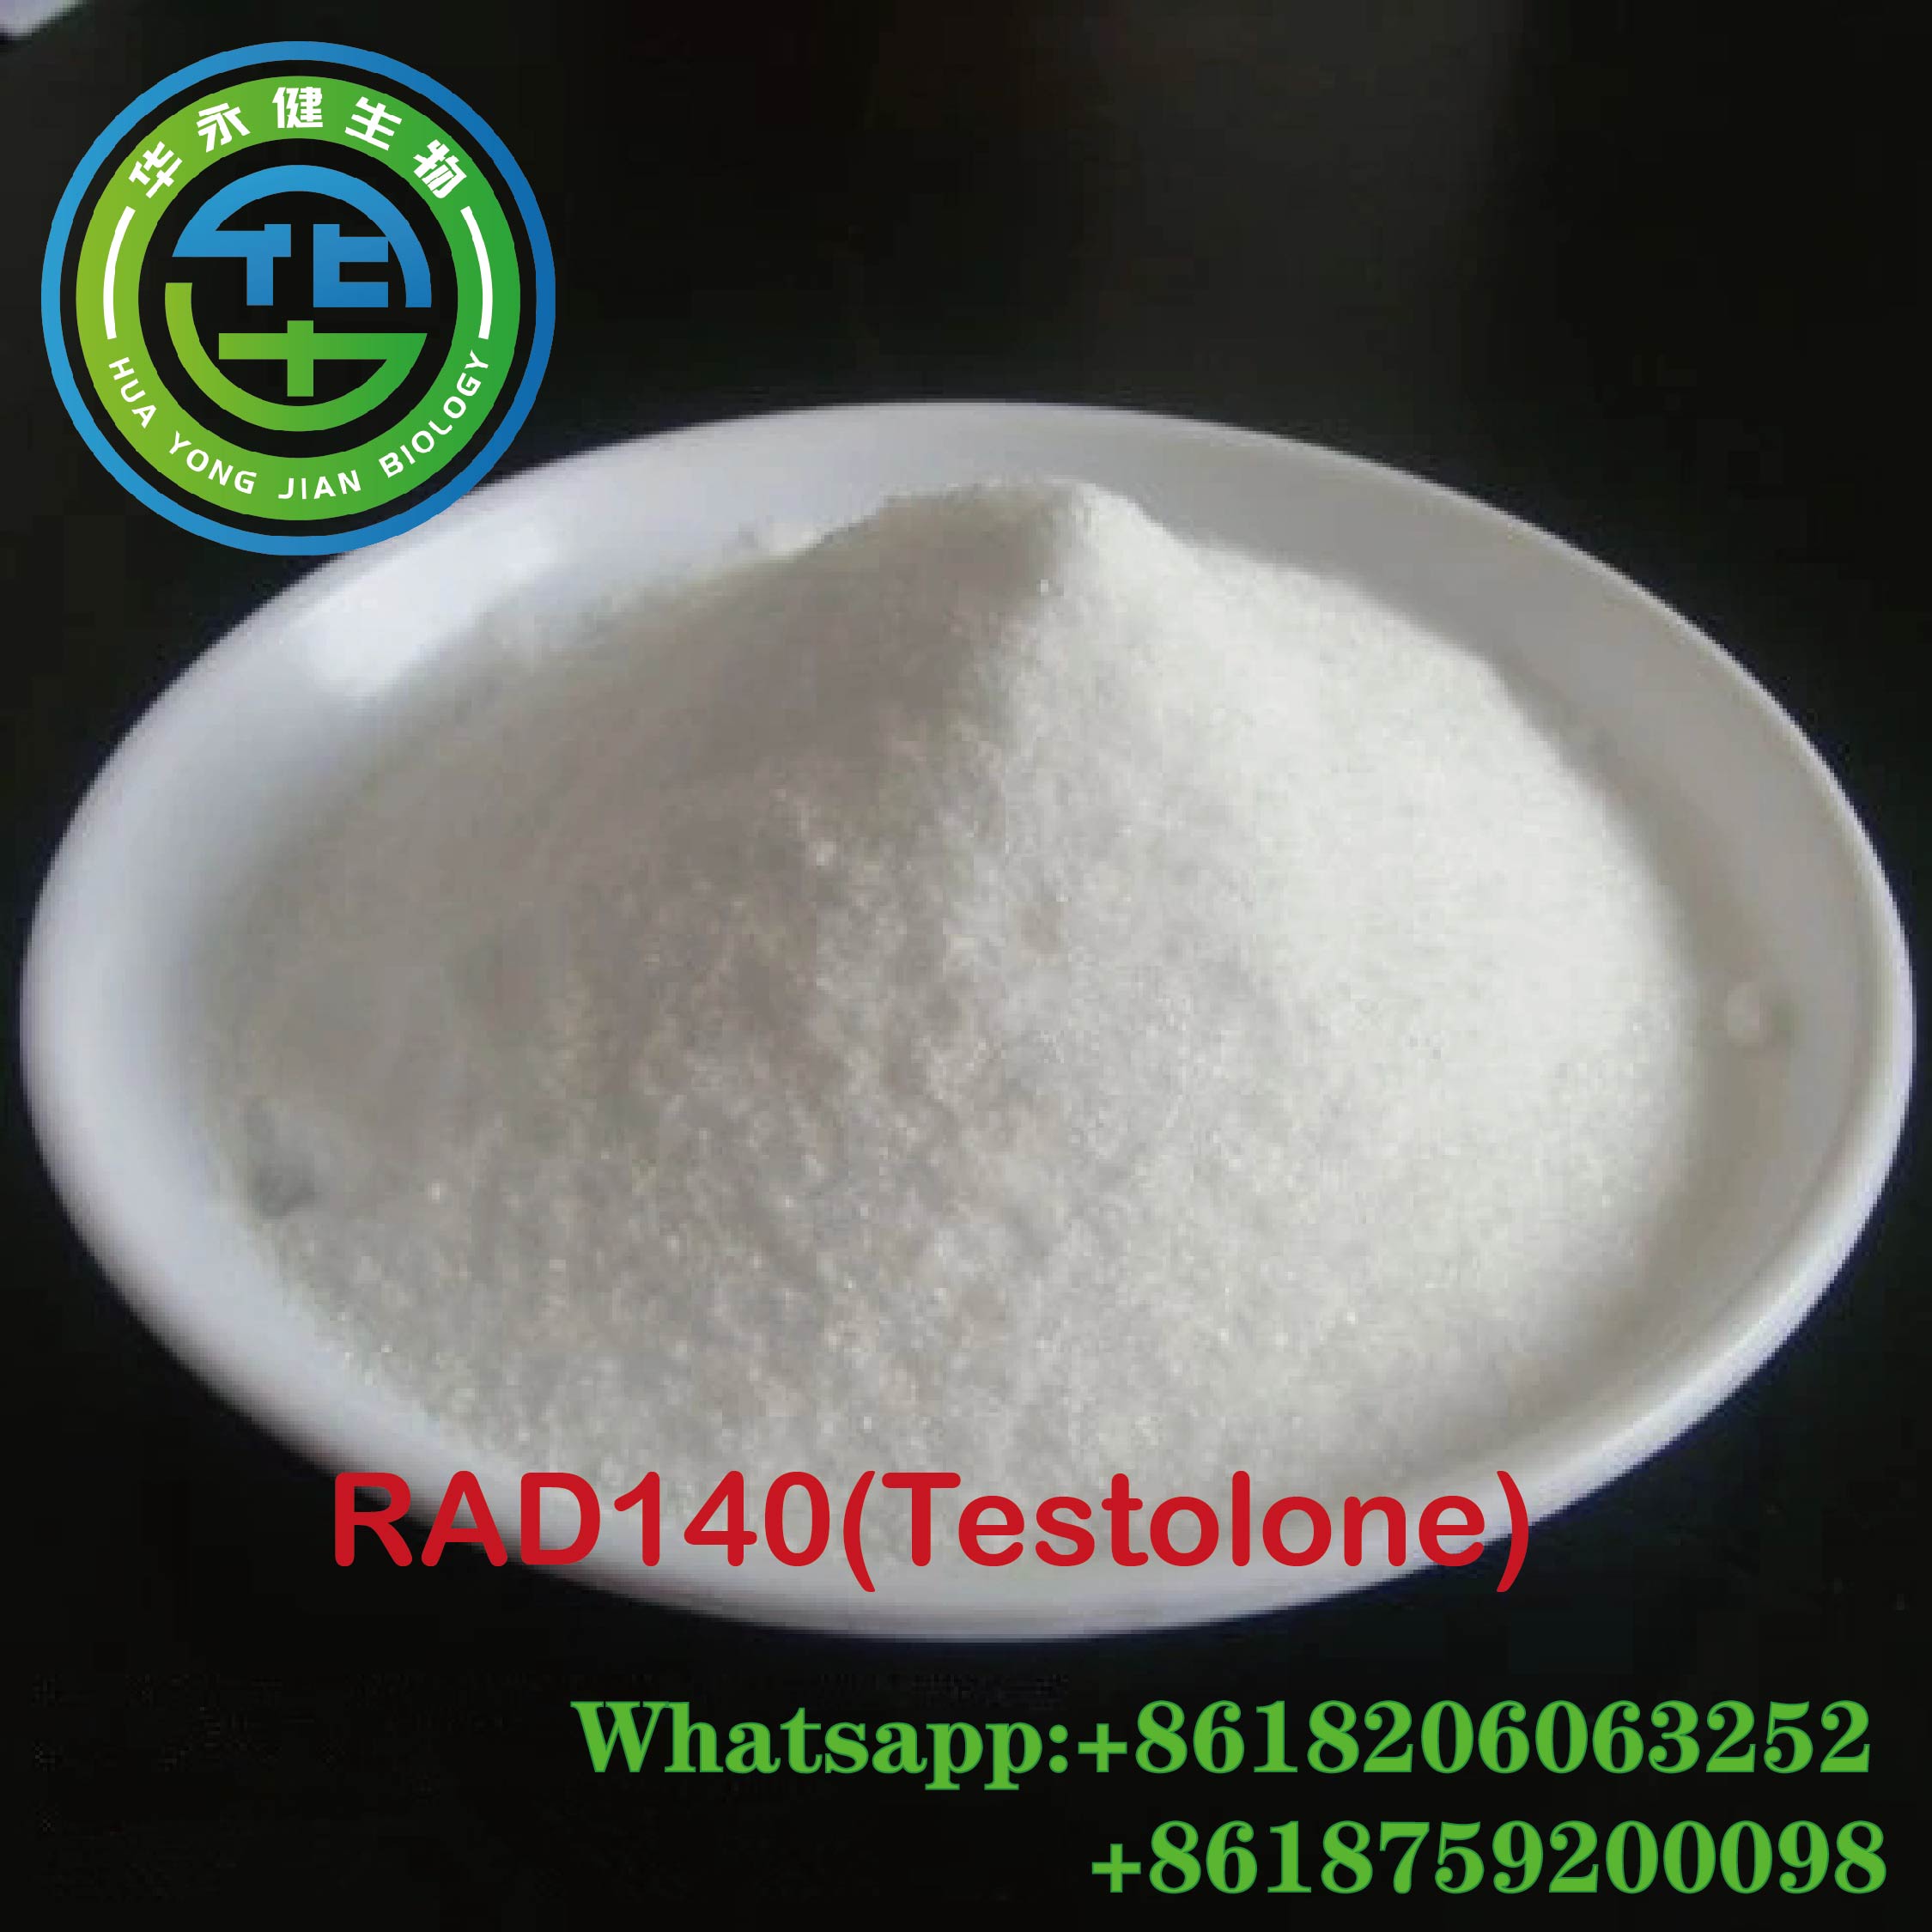 High Purity Rad140/Testolone Sarms Powder For Weight Loss with fast delivery and reasonable price